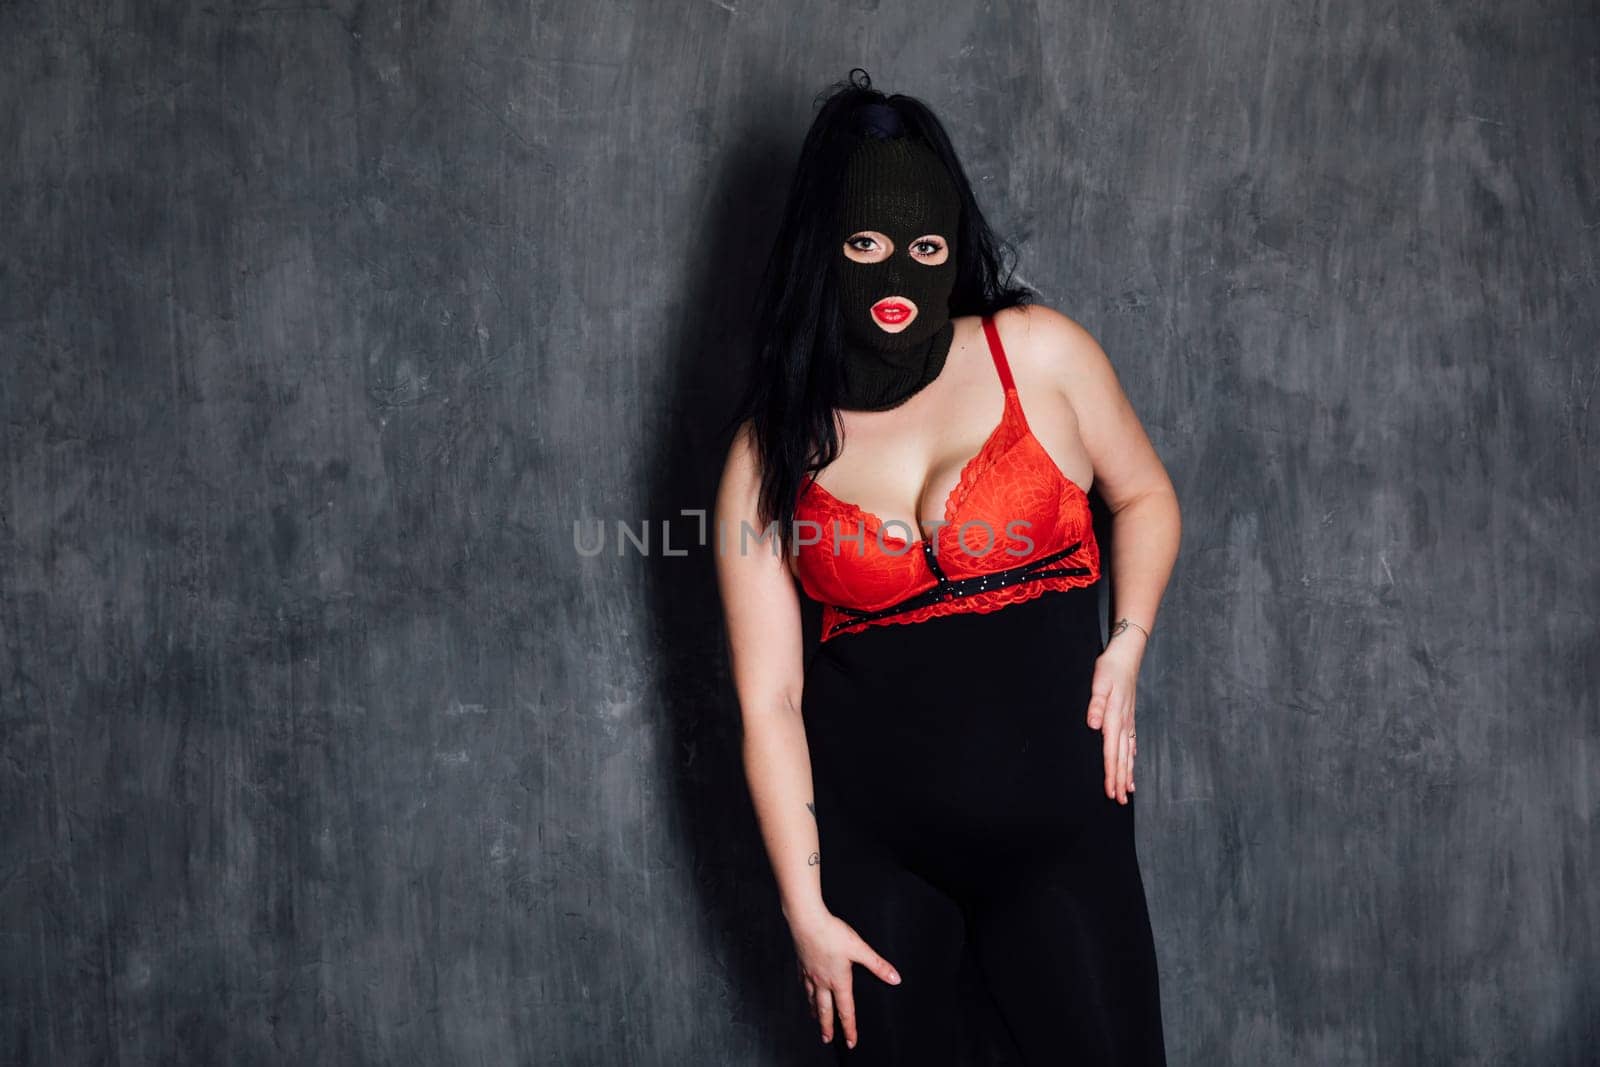 A masked woman in a room is a bandit